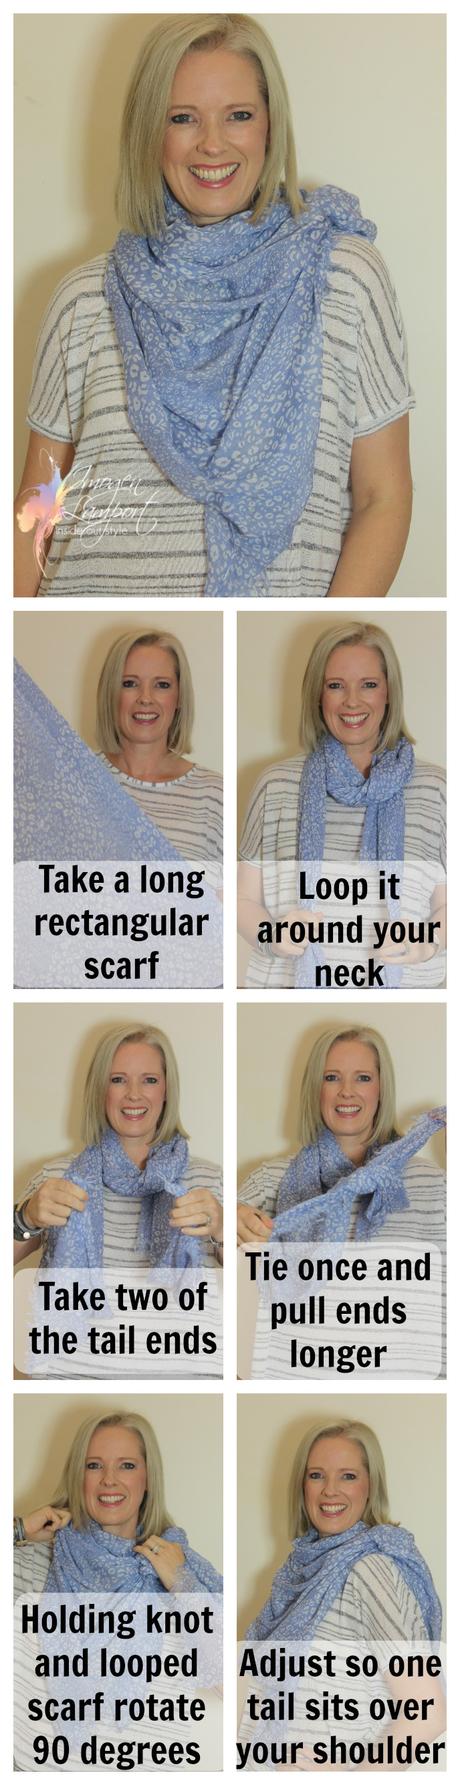 Inside Out Style: How to tie a rectangular scarf